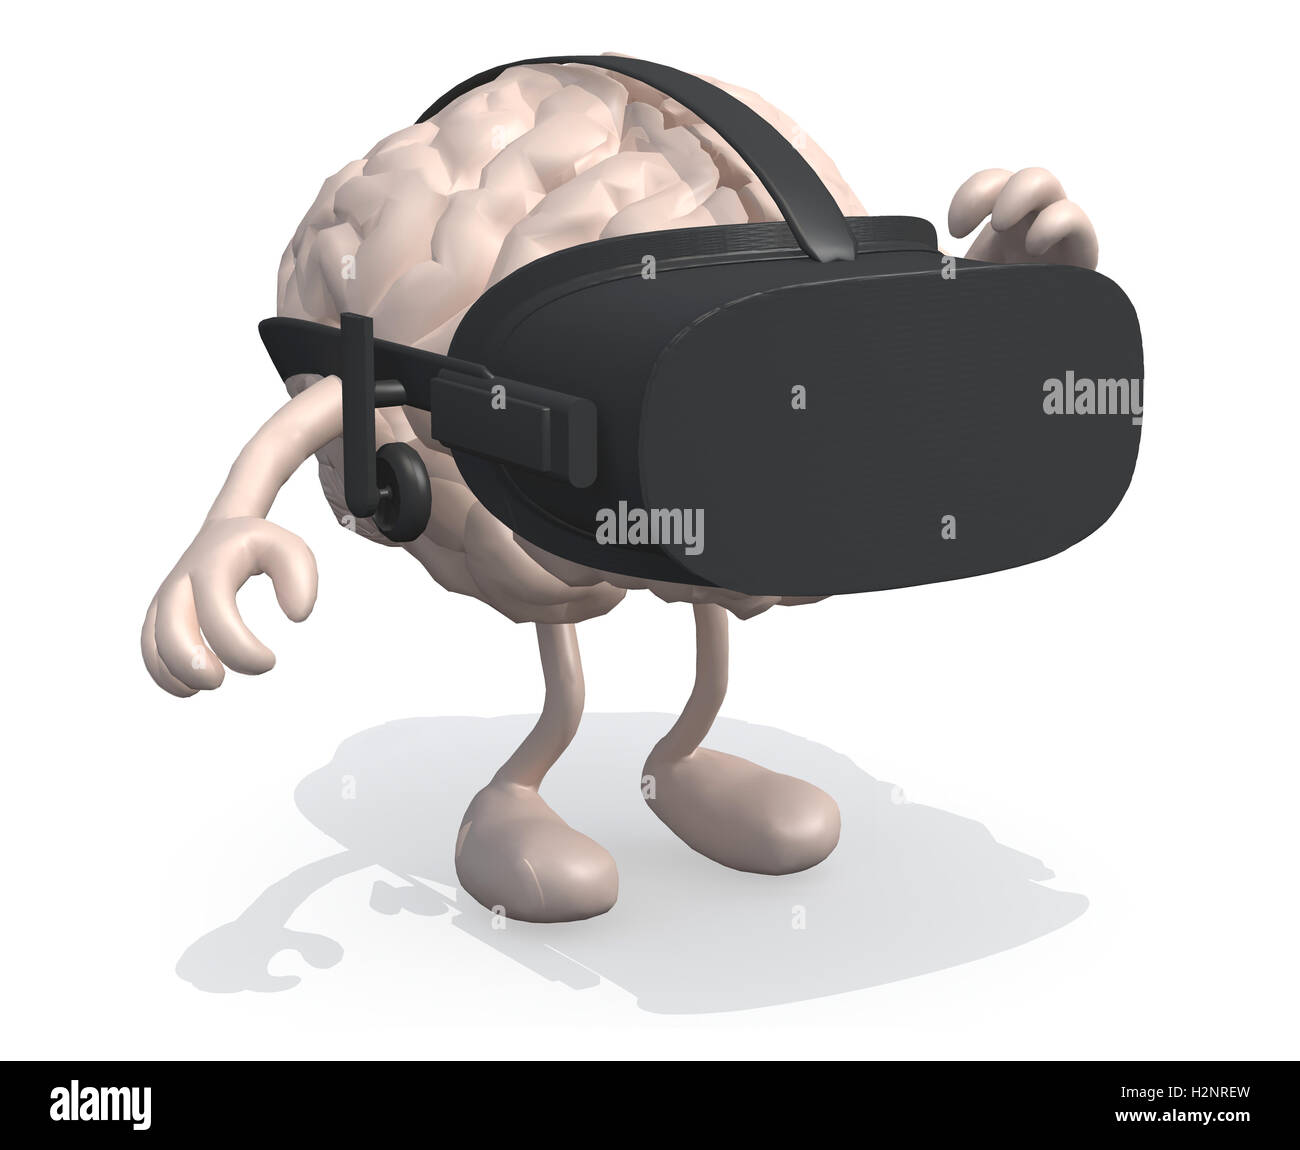 human brian with virtual reality glass, 3d illustration Stock Photo